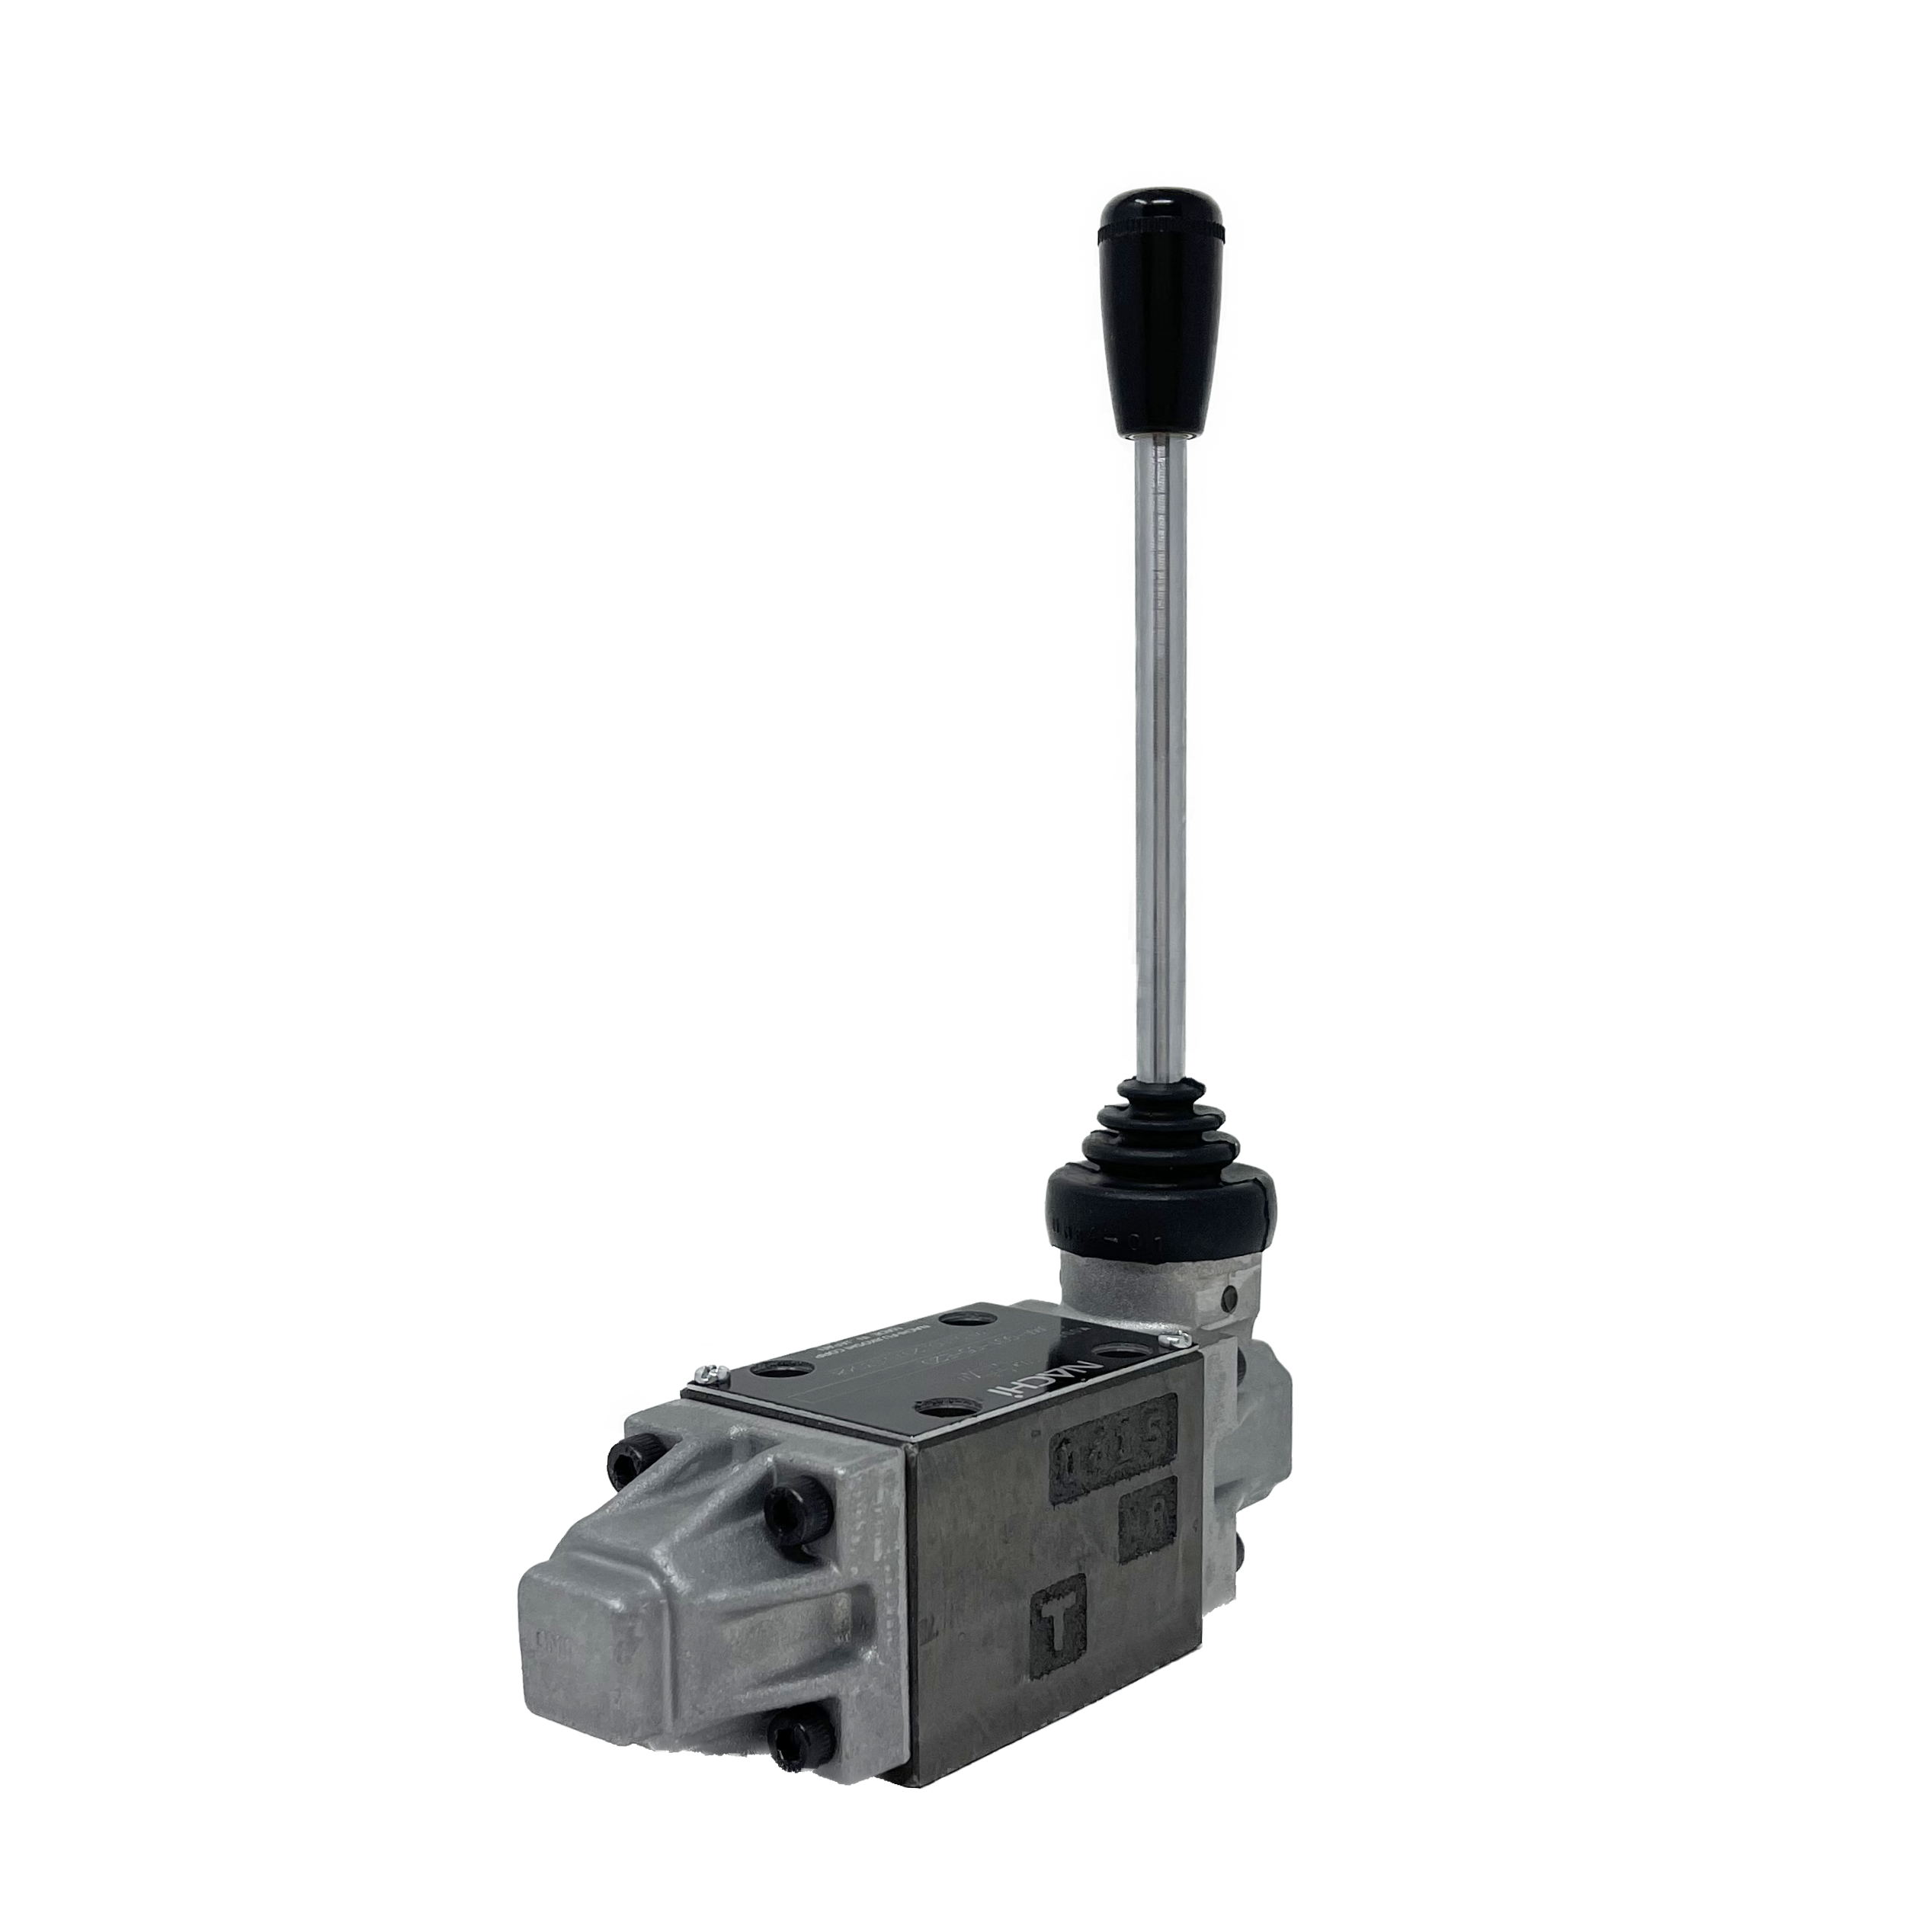 DMA-G01-F5-E20 : Nachi Manual Lever Valve, 4-Way, D03 (NG6), 10.5GPM, 5075psi, All Ports Blocked Neutral, Detented